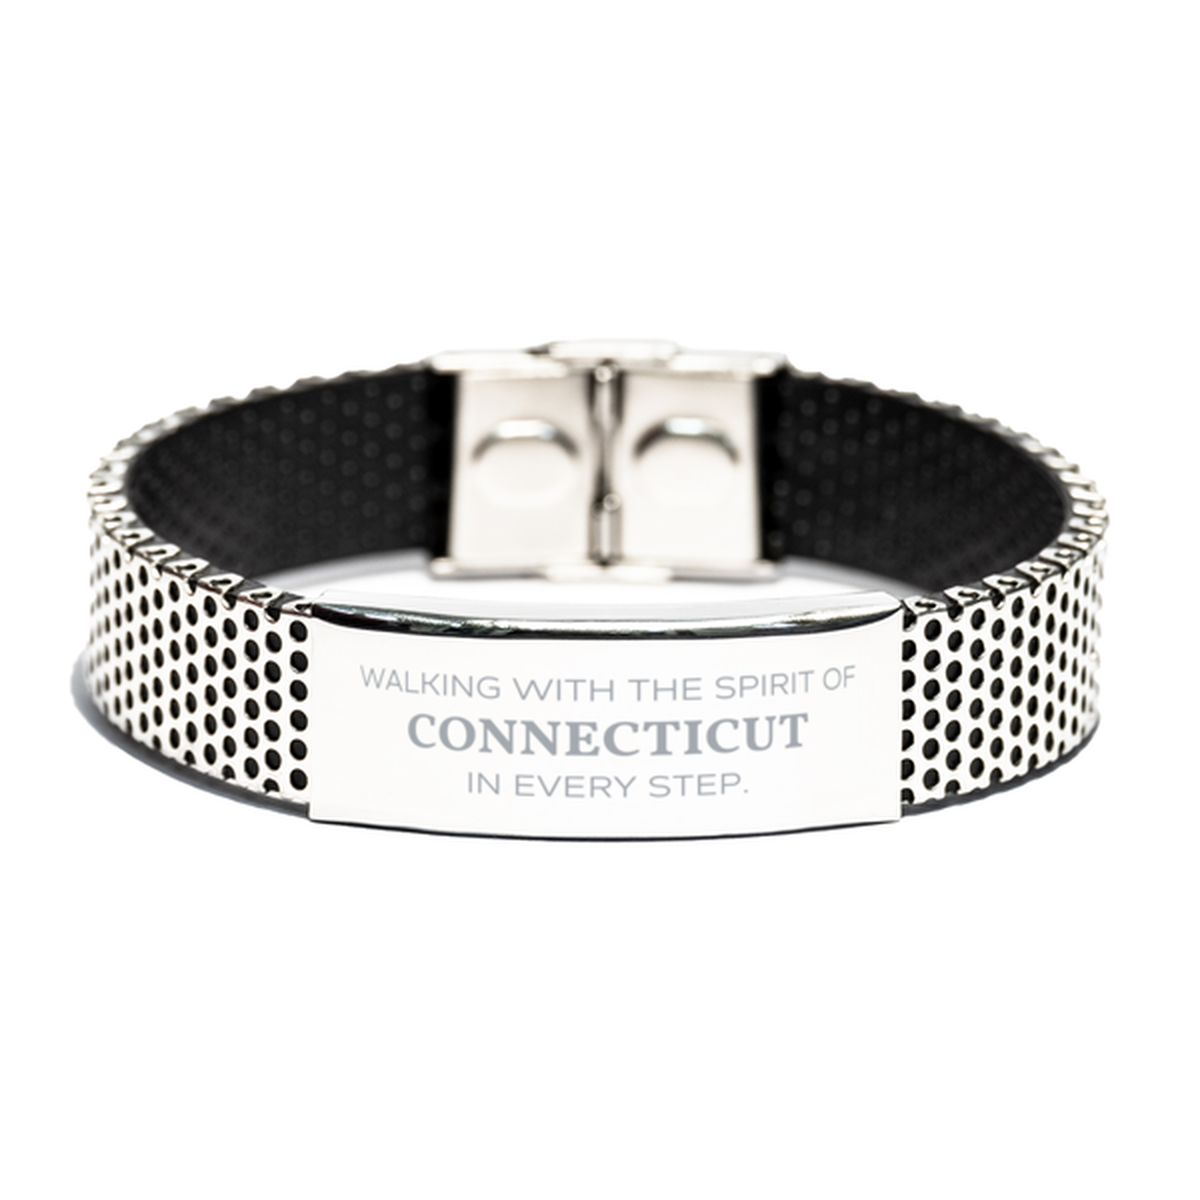 Connecticut Gifts, Walking with the spirit, Love Connecticut Birthday Christmas Stainless Steel Bracelet For Connecticut People, Men, Women, Friends